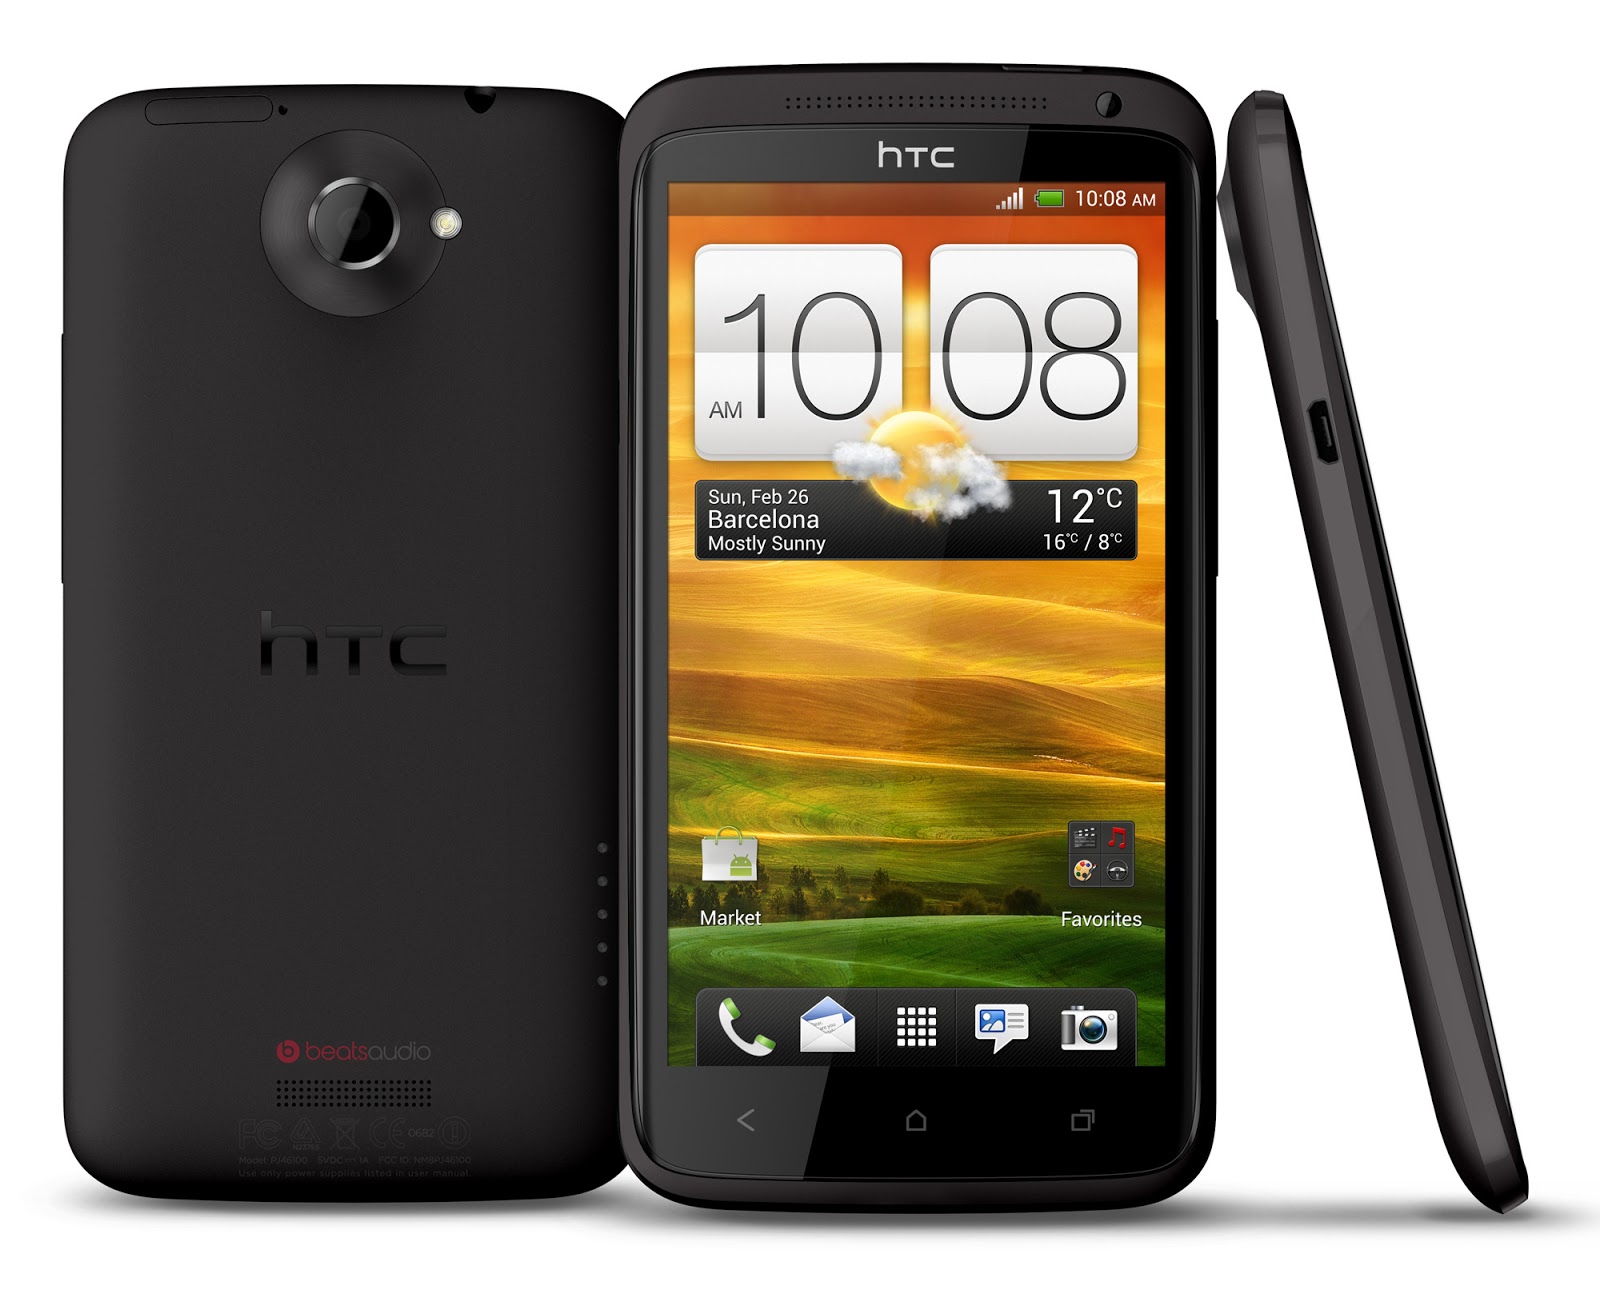 Let`s Talk About Old But Amazing HTC Smart Phone - Juicy Android